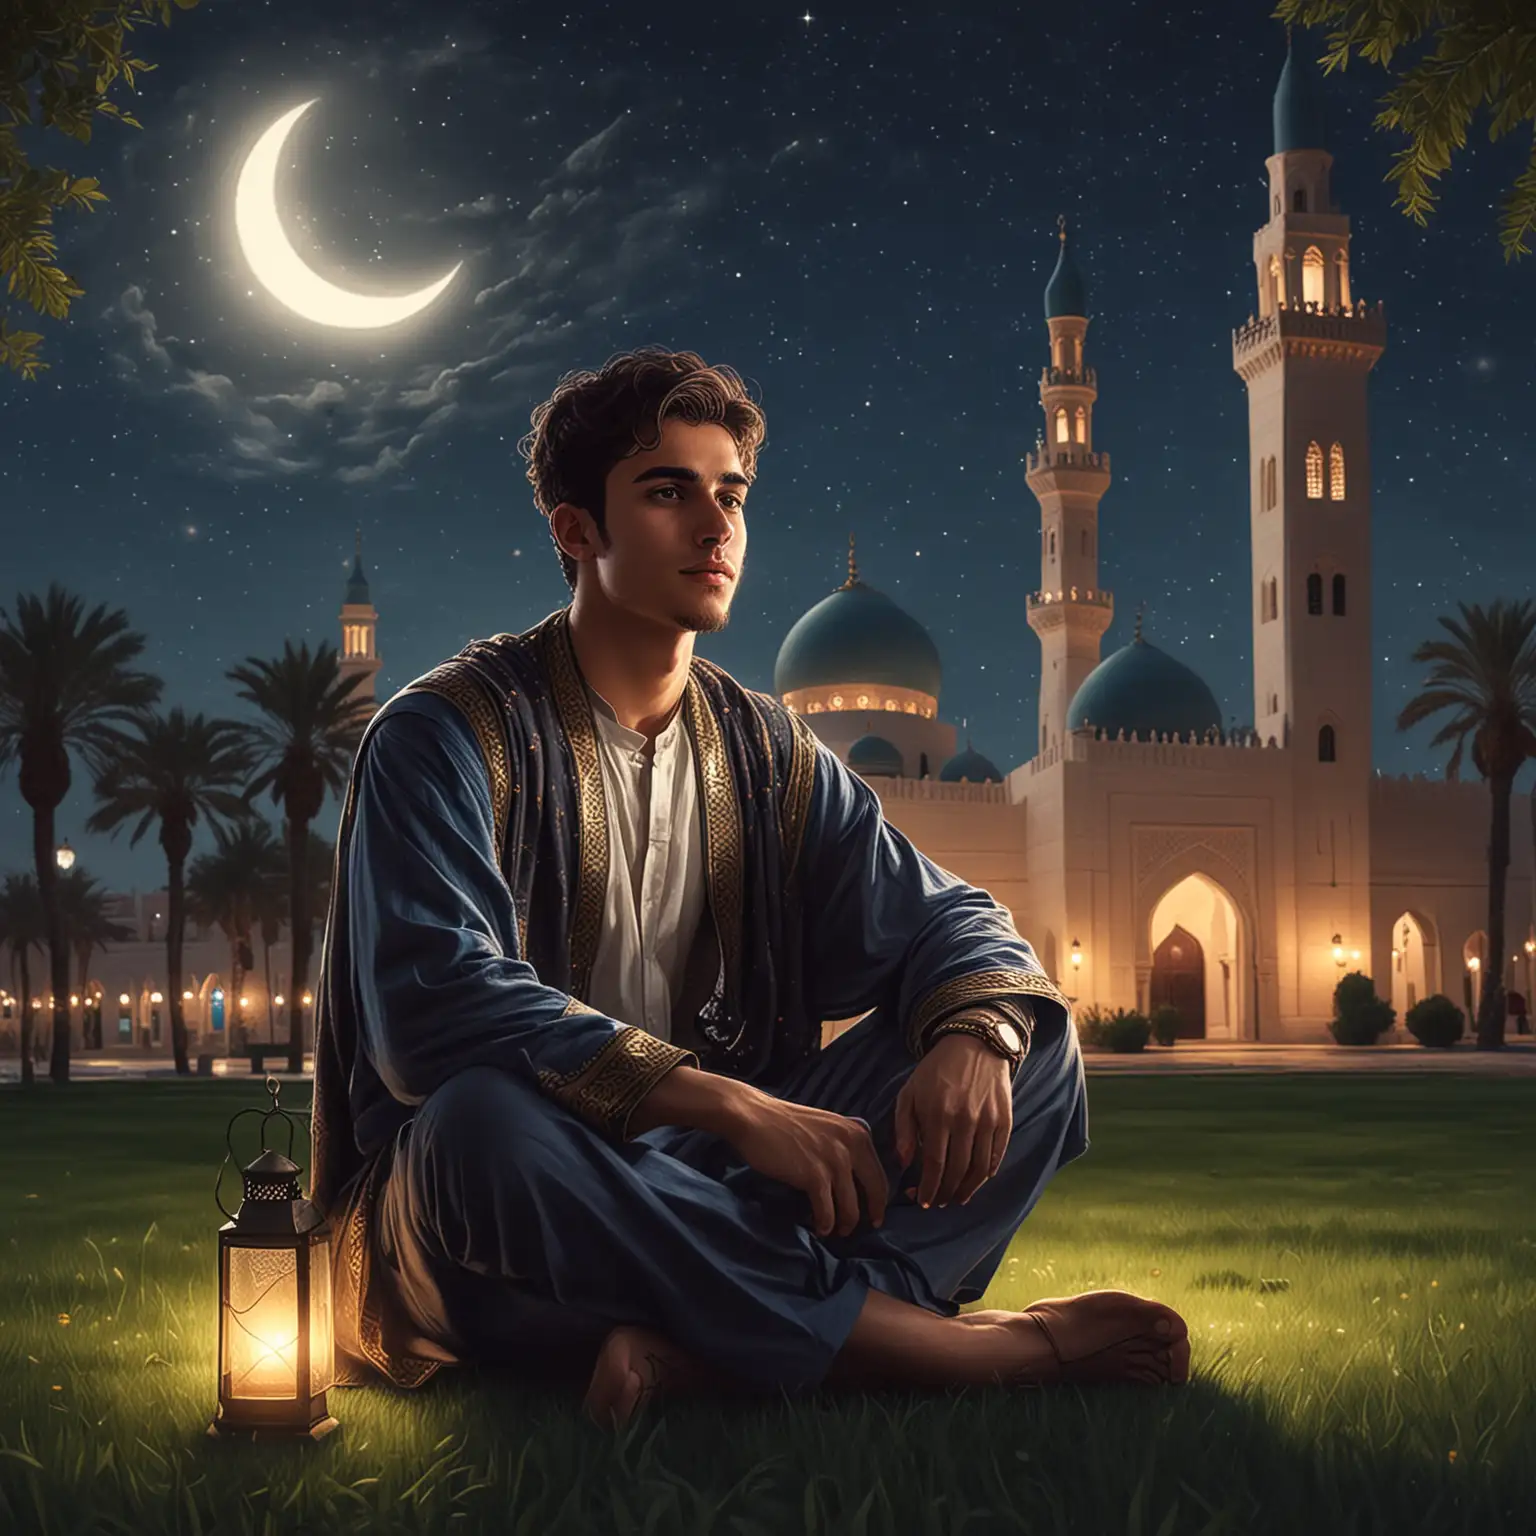 Draw a young man in Arab attire sitting on the grass in front of a mosque at night with lights and a crescent and a small lamp with features of my face from my Facebook account